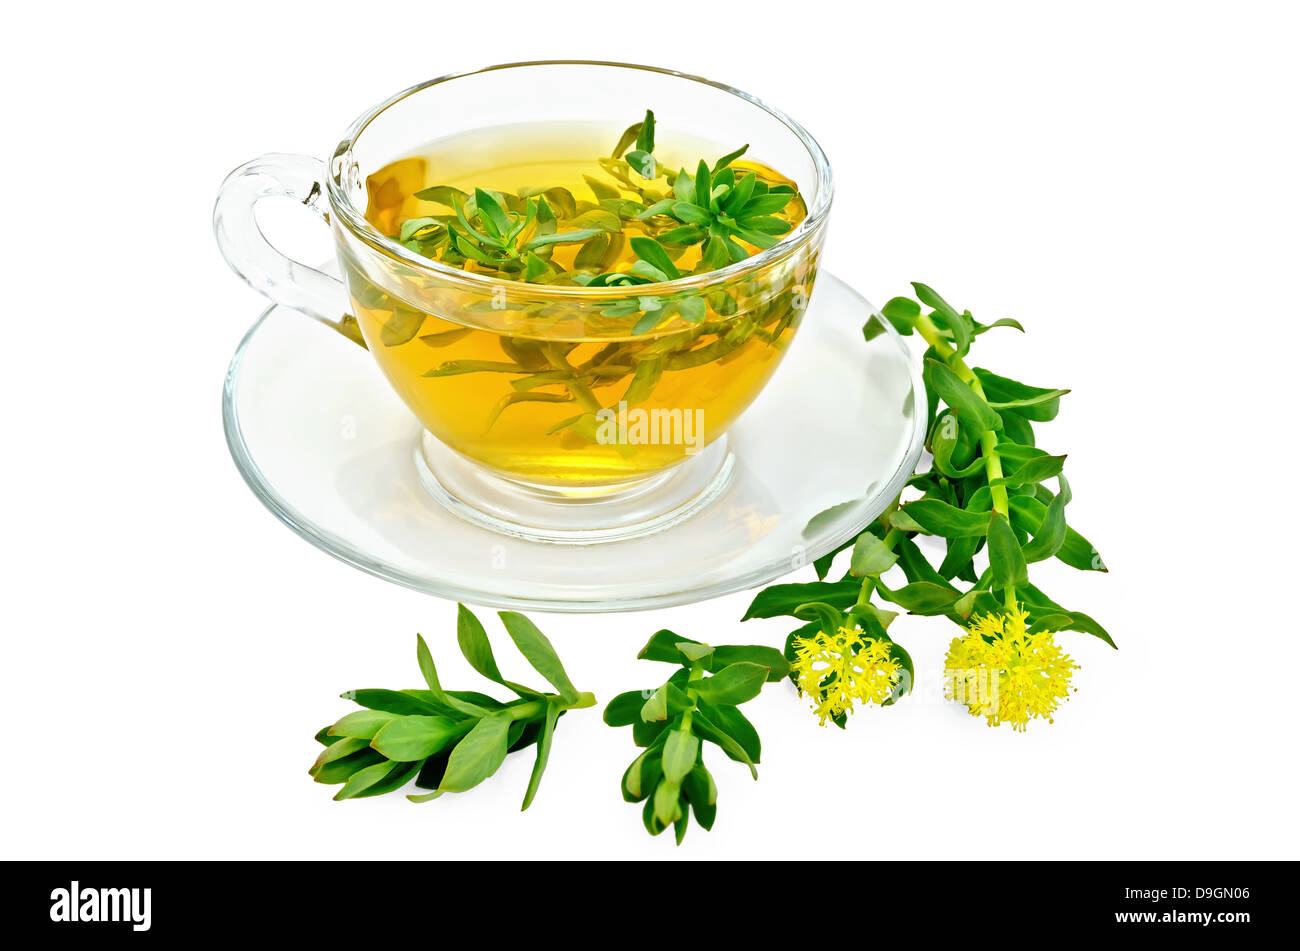 Healing herbal tea in glass cup with flowers Rhodiola rosea is isolated on a white background Stock Photo